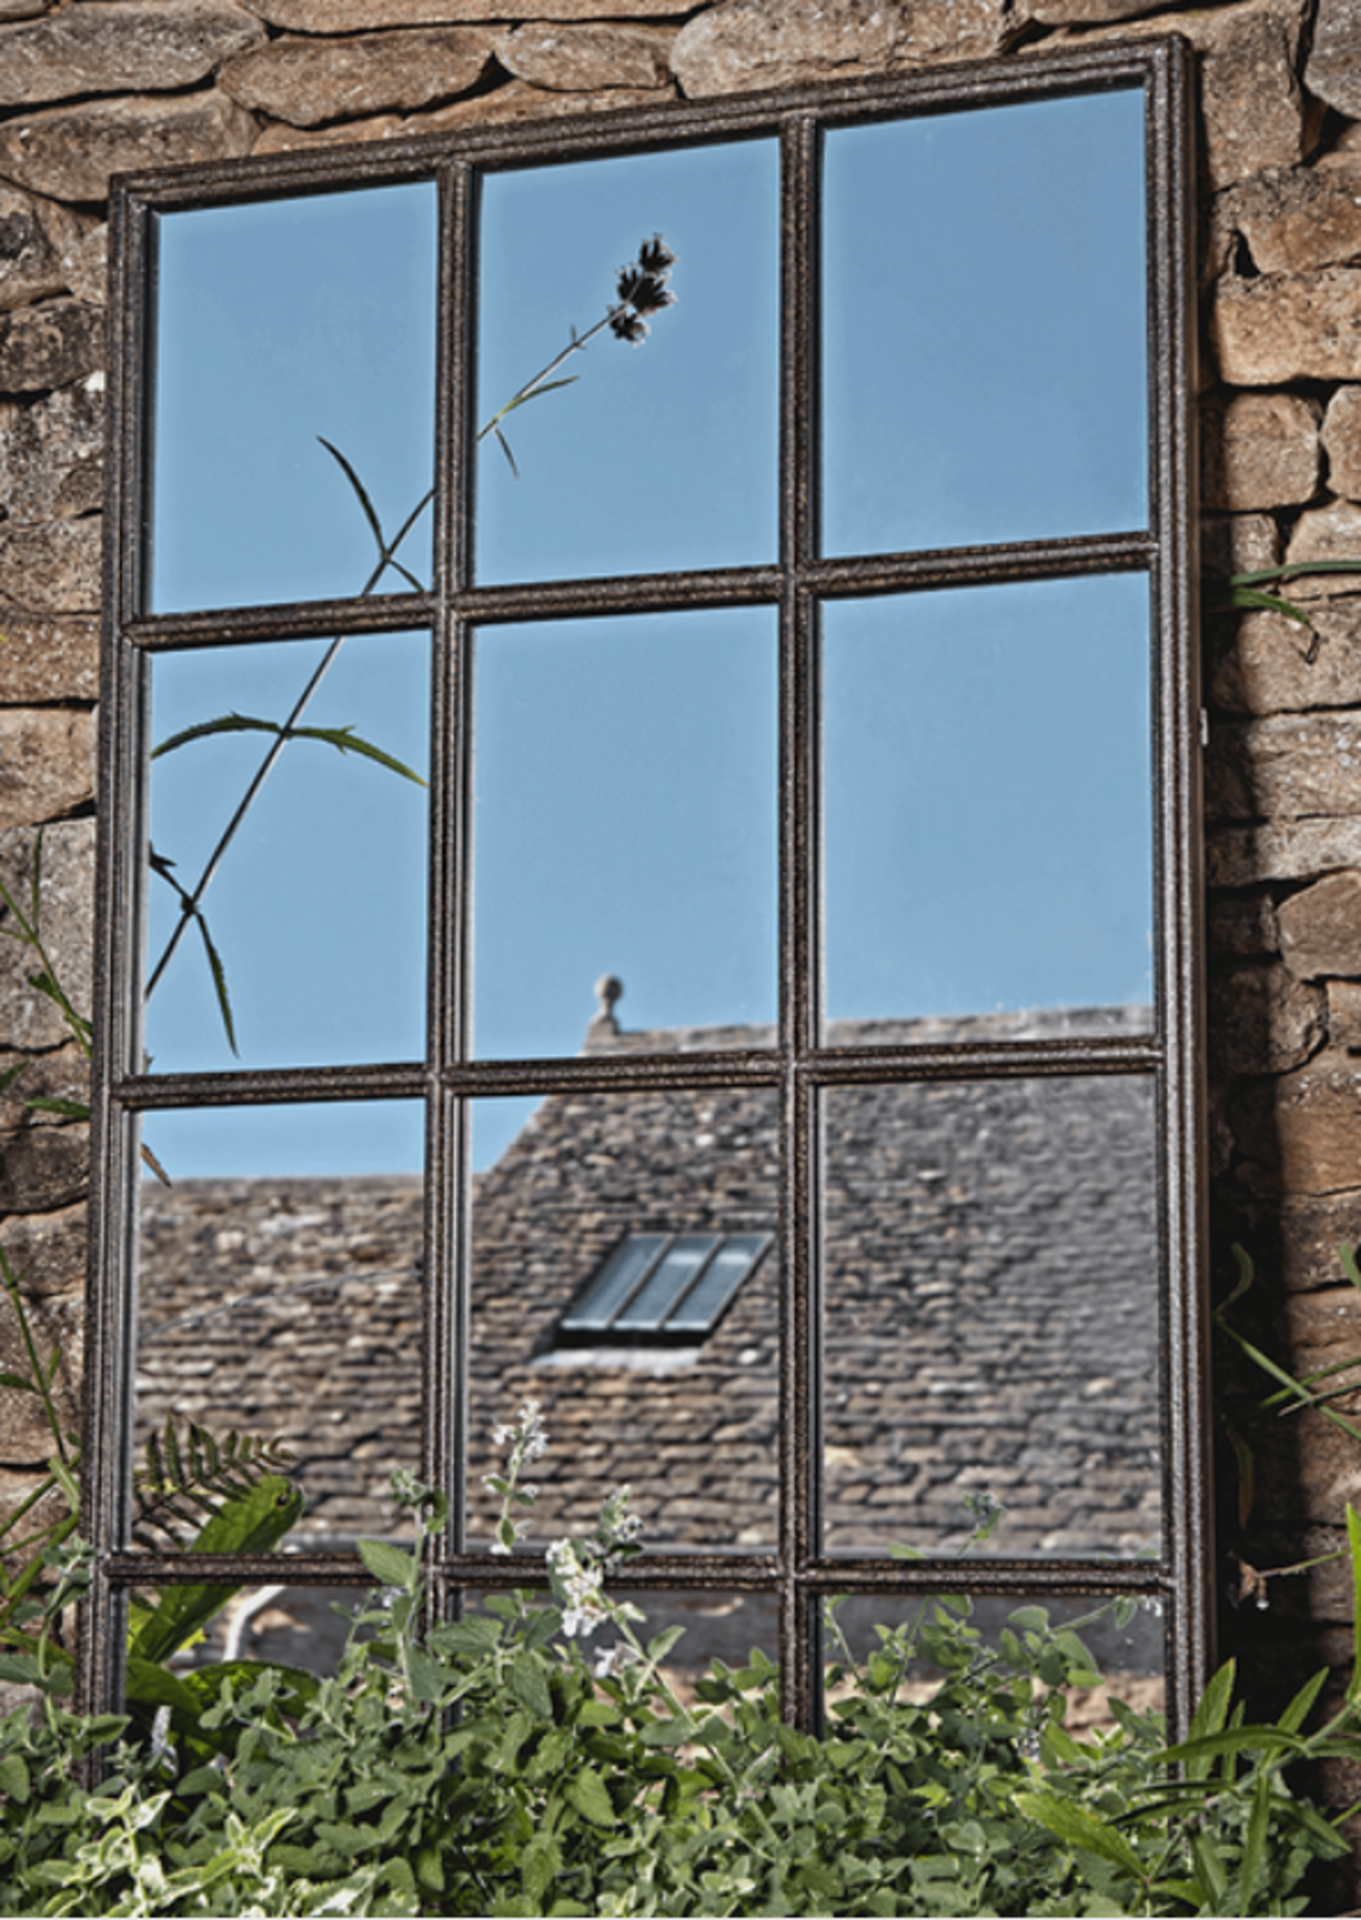 New & Boxed Outdoor Industrial Window Mirror. RRP £225.Total: H 100 x W 60 x D 4cm. Features: Made